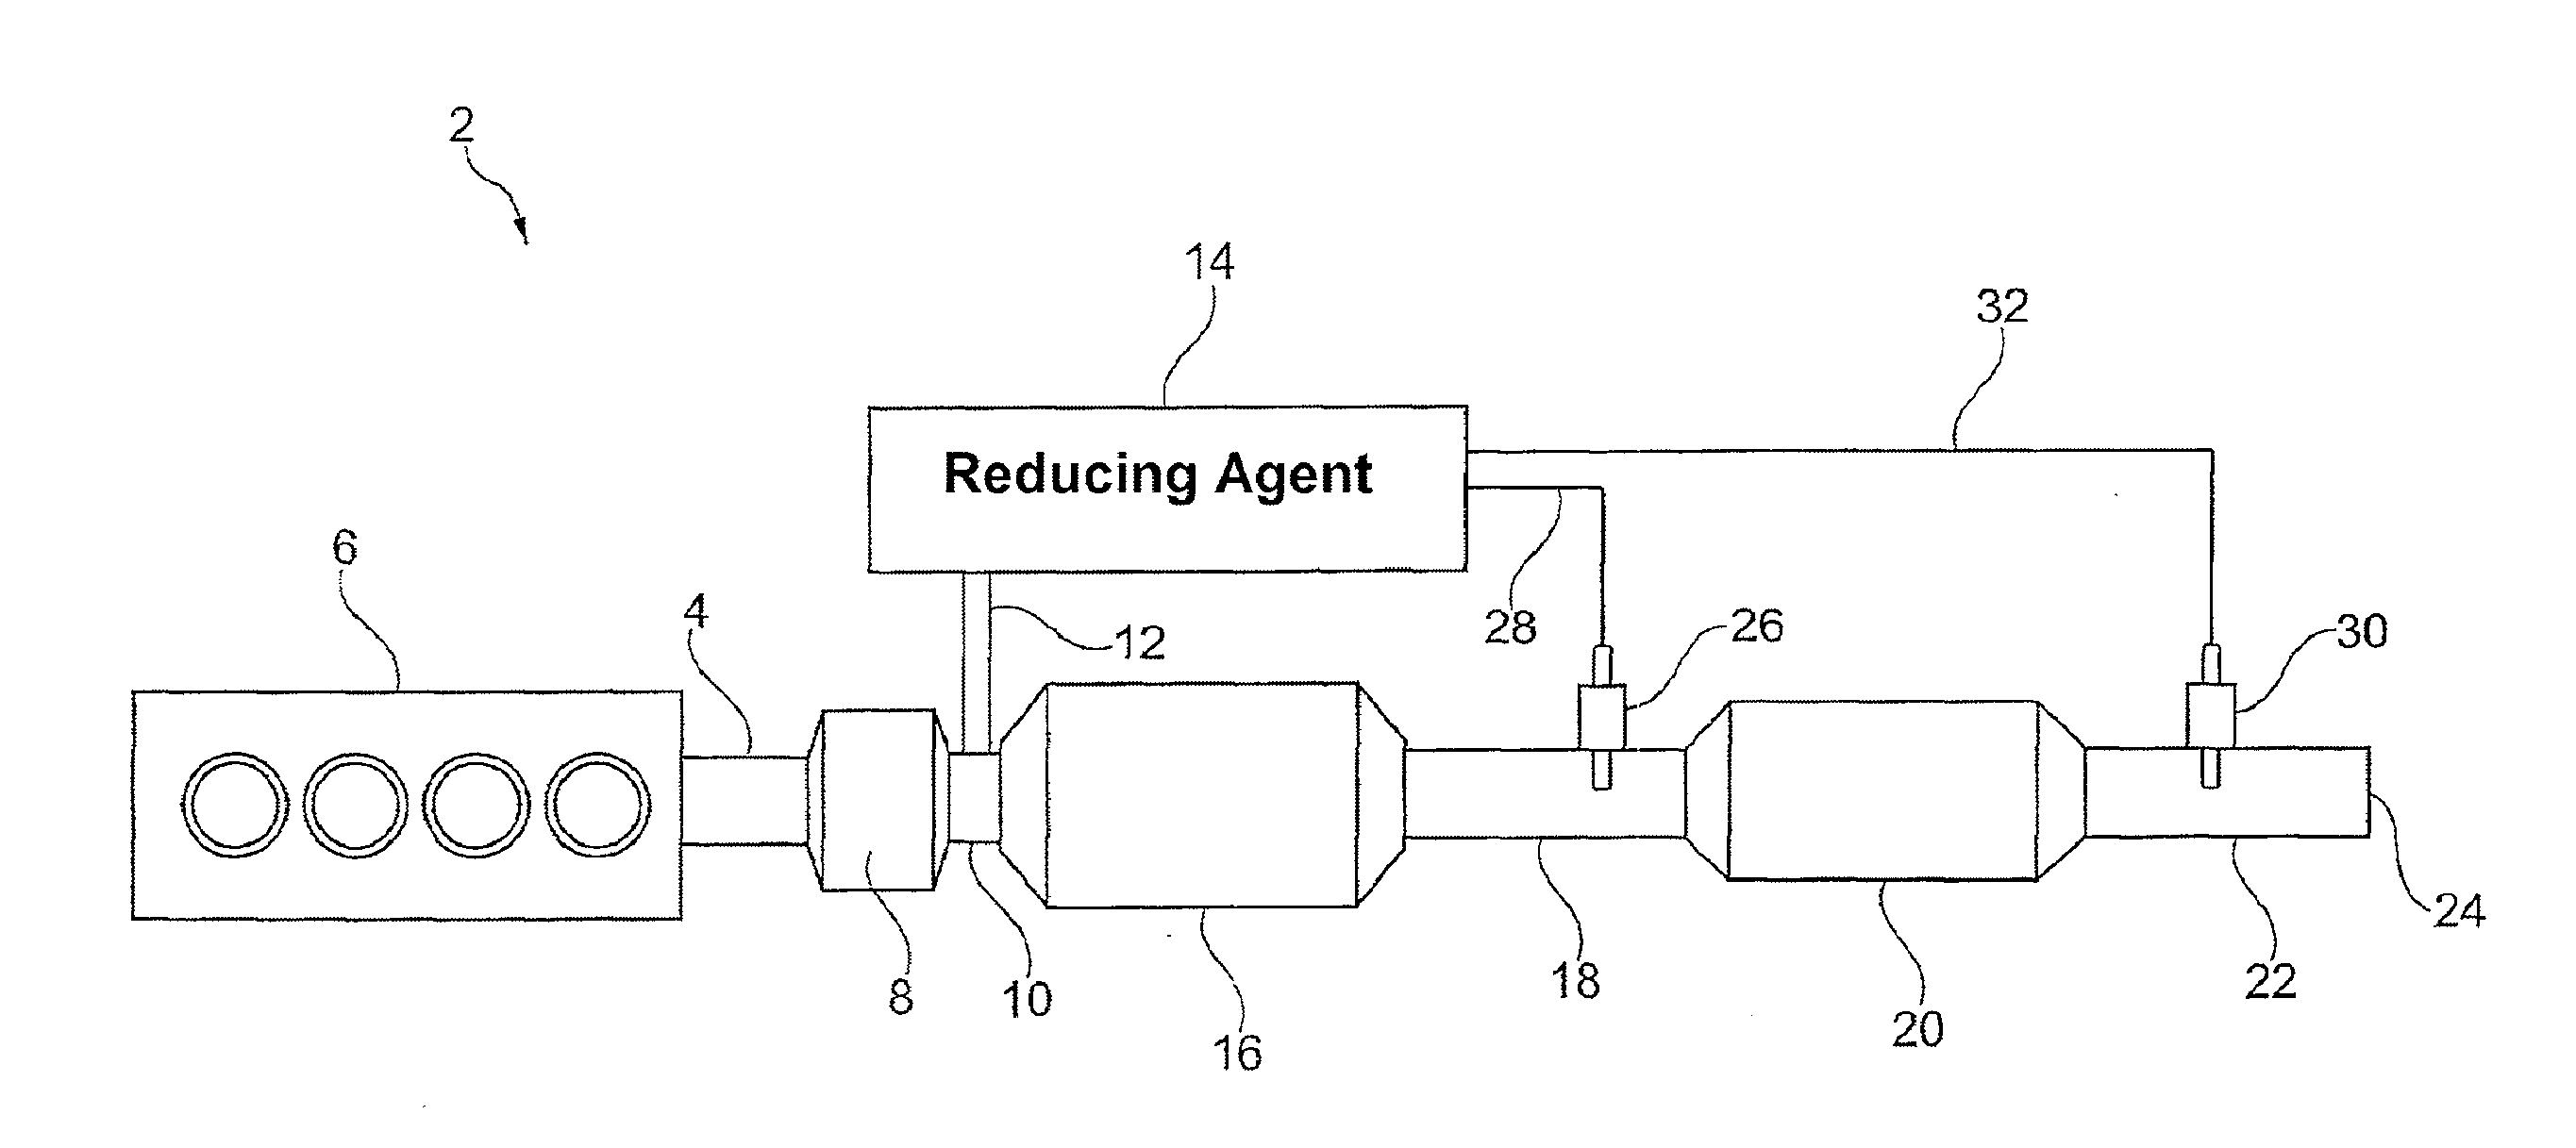 Sensor for Detecting the Amount of a Reducing Agent and the Amount of a Pollutant in an Exhaust Gas